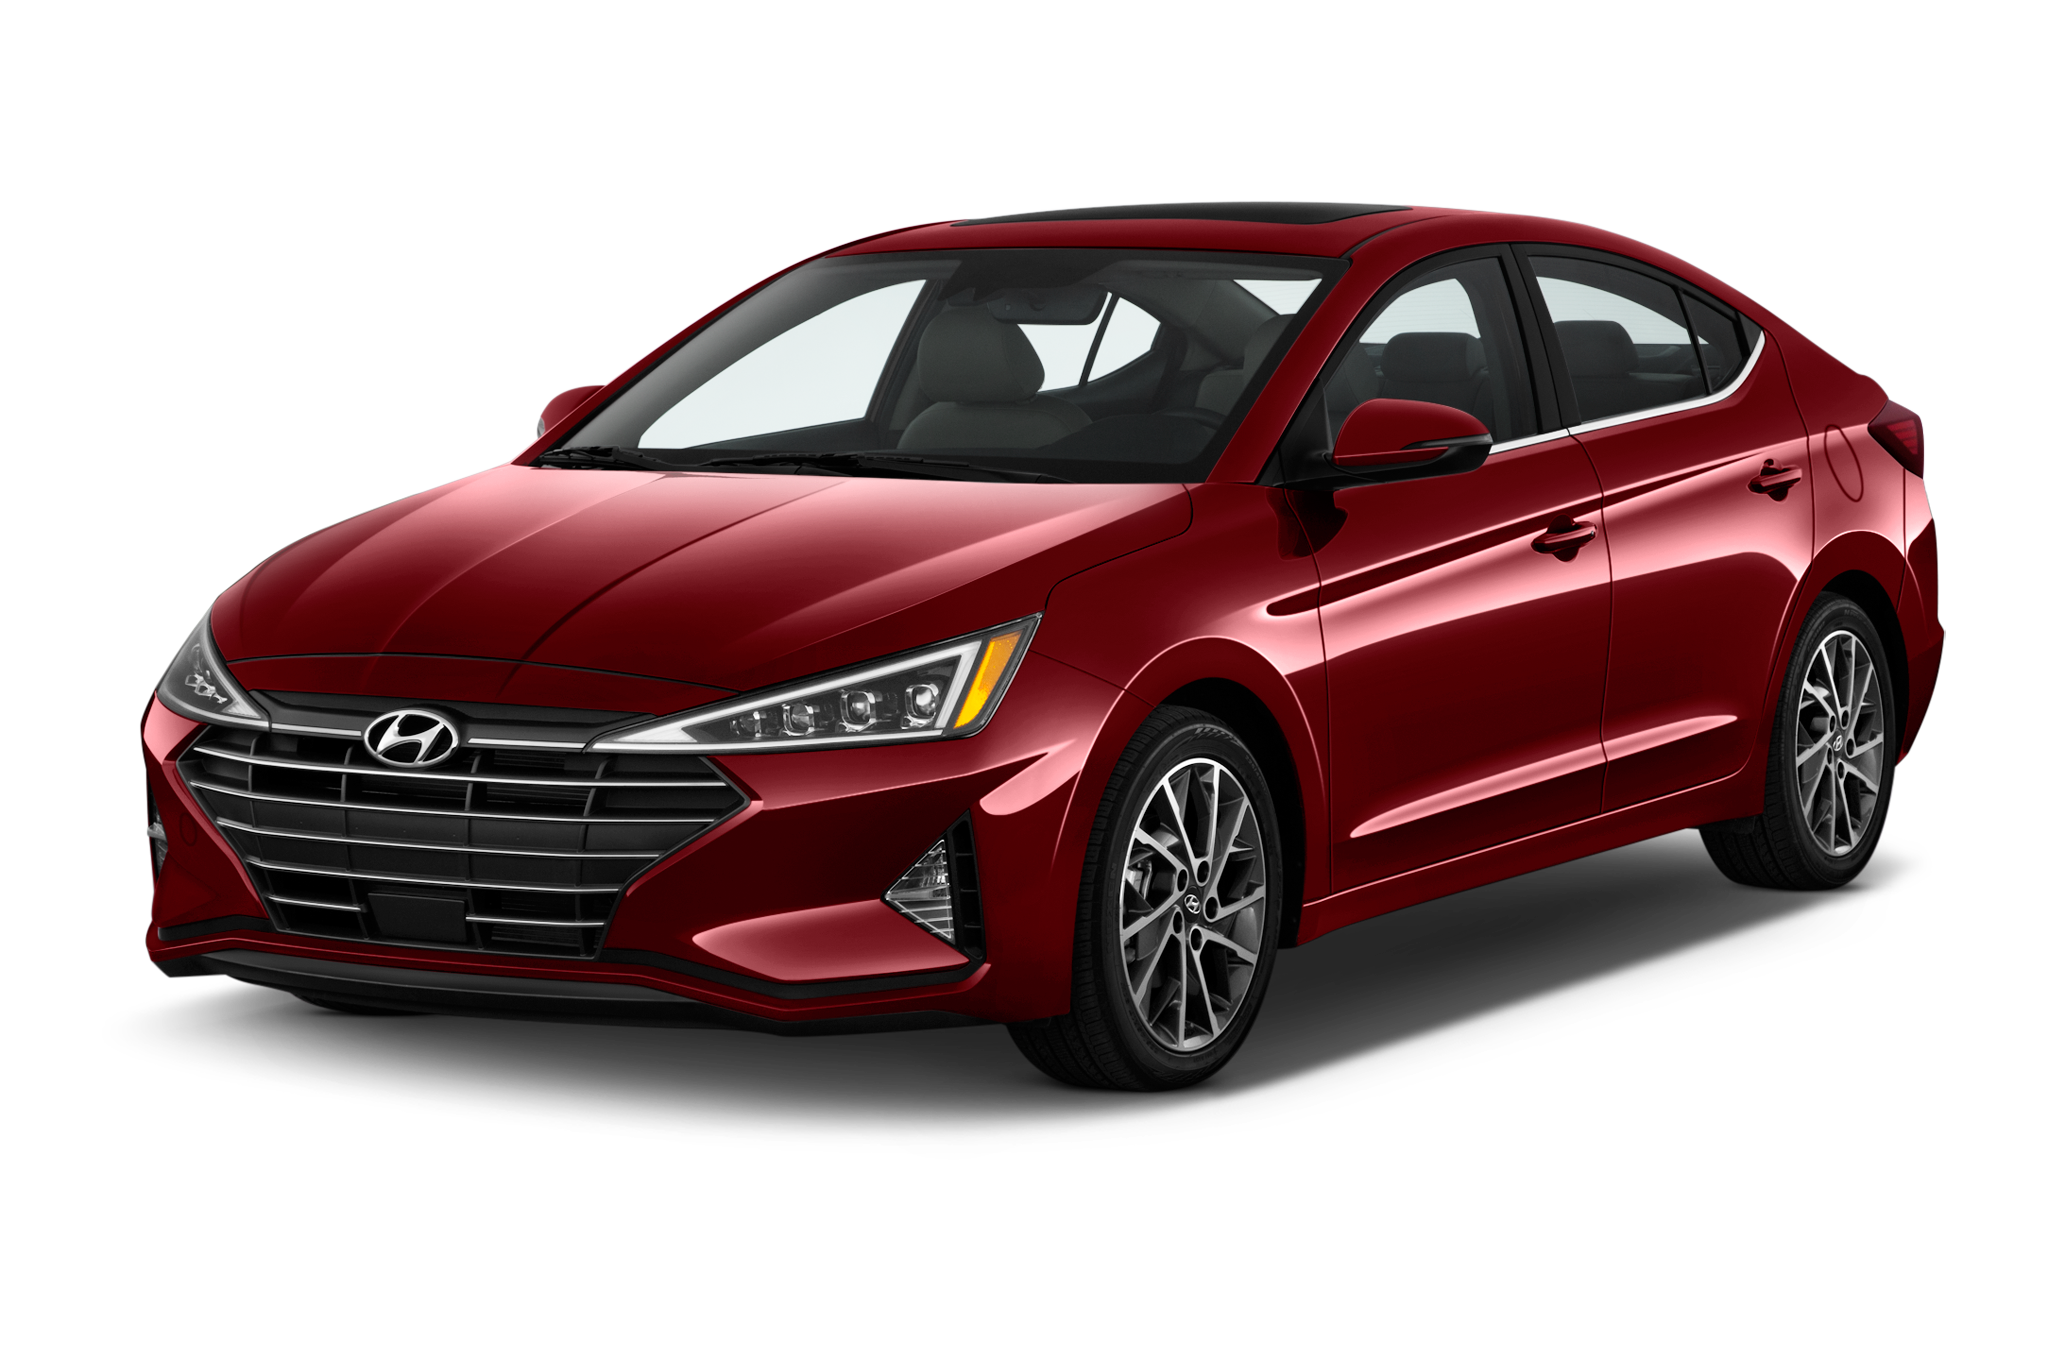 2020 Hyundai Elantra 2.0 Limited A/T Specs and Features ...